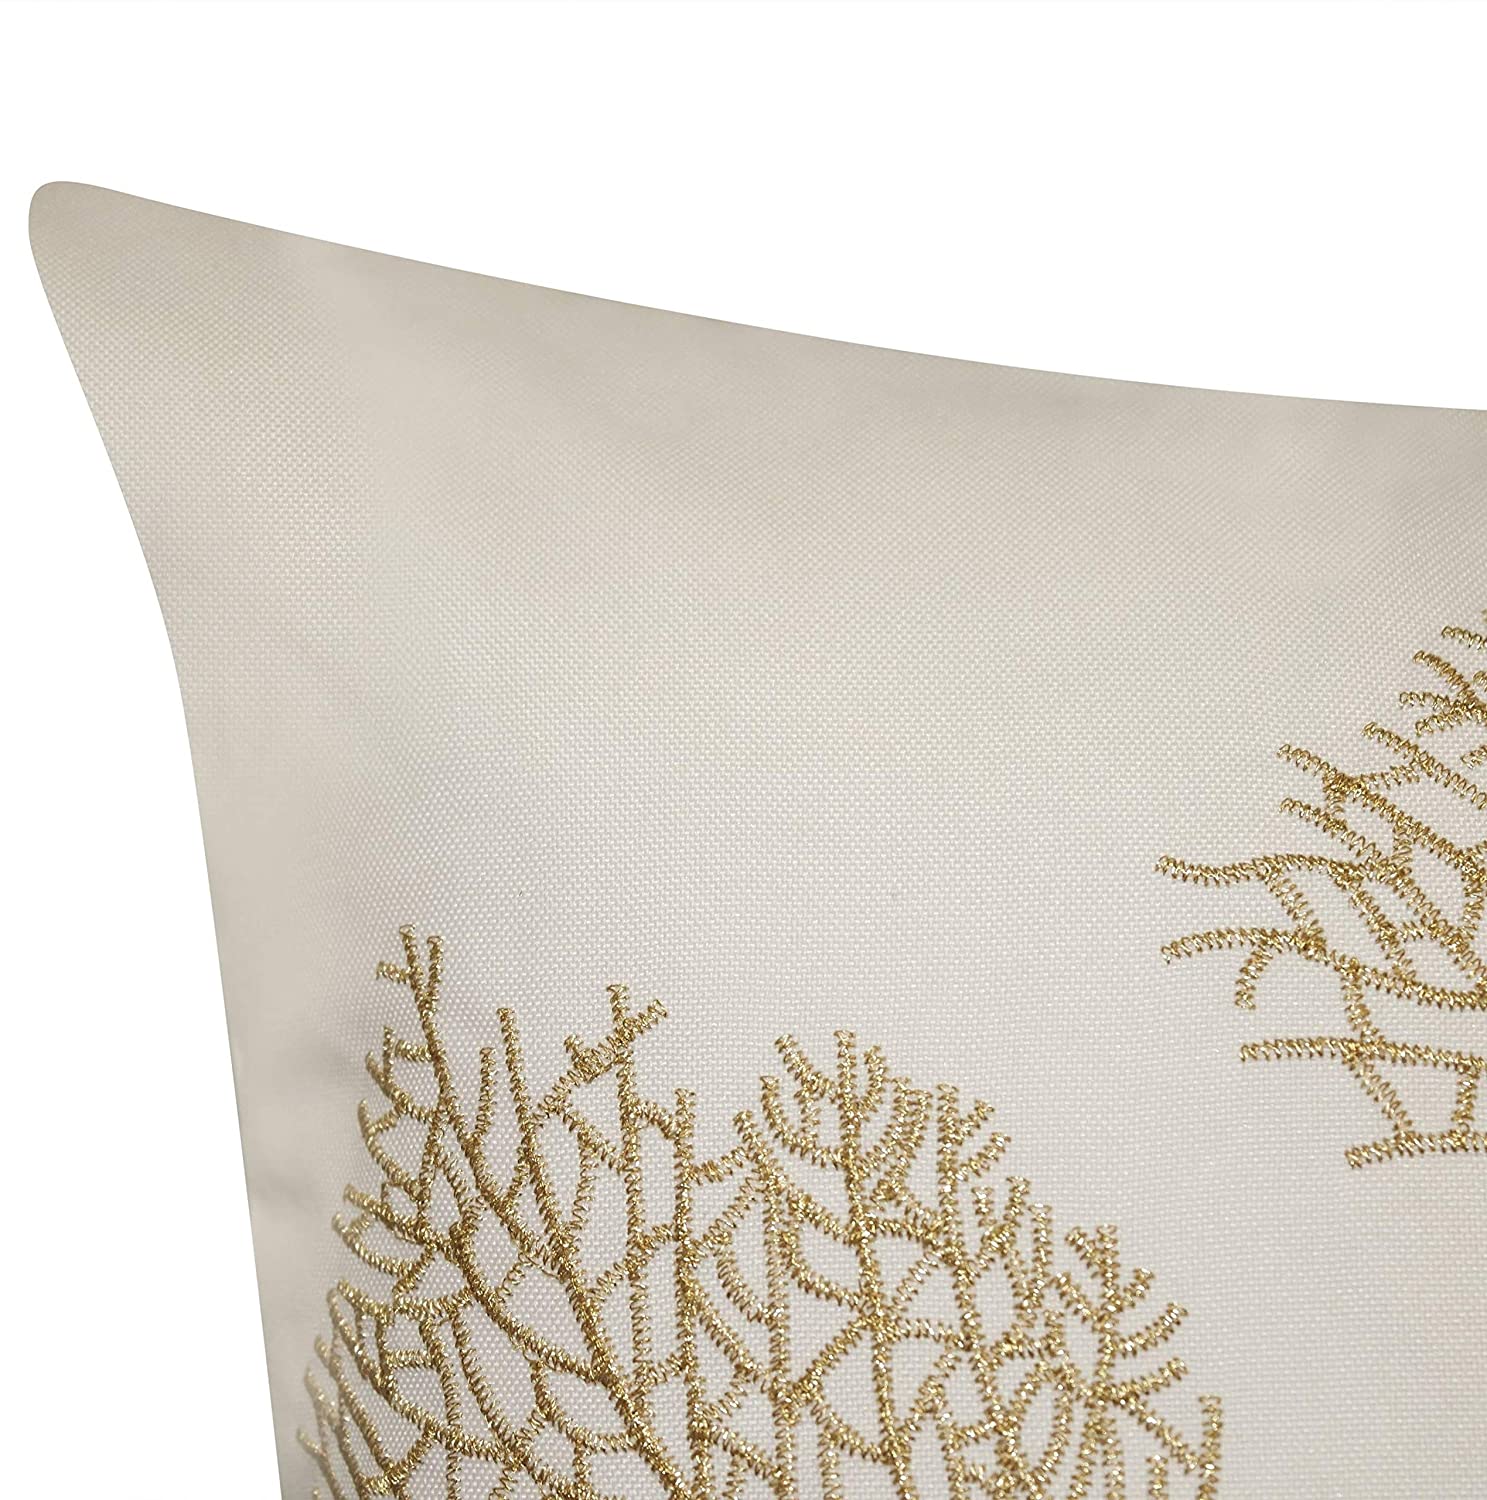 MISC Embroidered Printed Coral Outdoor Pillow Cream Nature Nautical Coastal Polyester